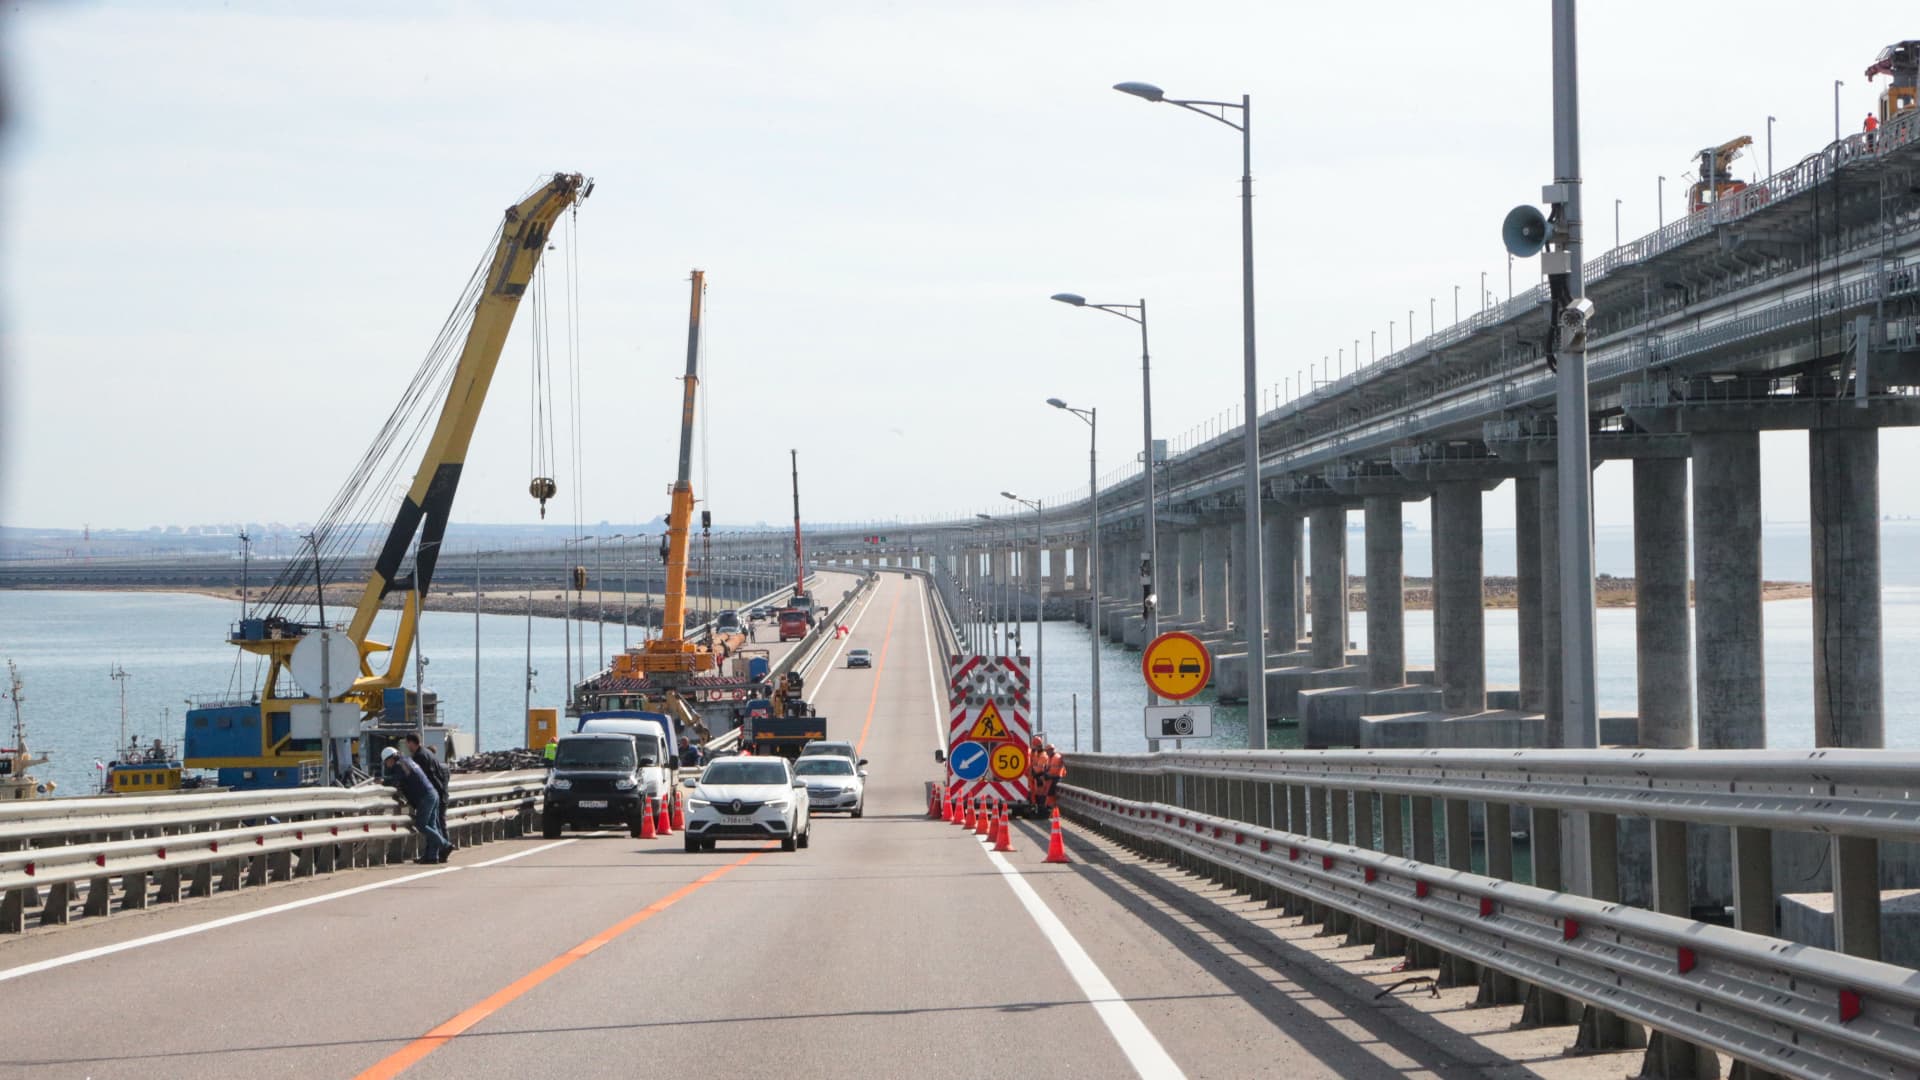 This picture taken on October 13, 2022 shows workers restoring damaged parts of the Kerch Bridge that links Crimea to Russia, which was hit by a blast on October 8, 2022.